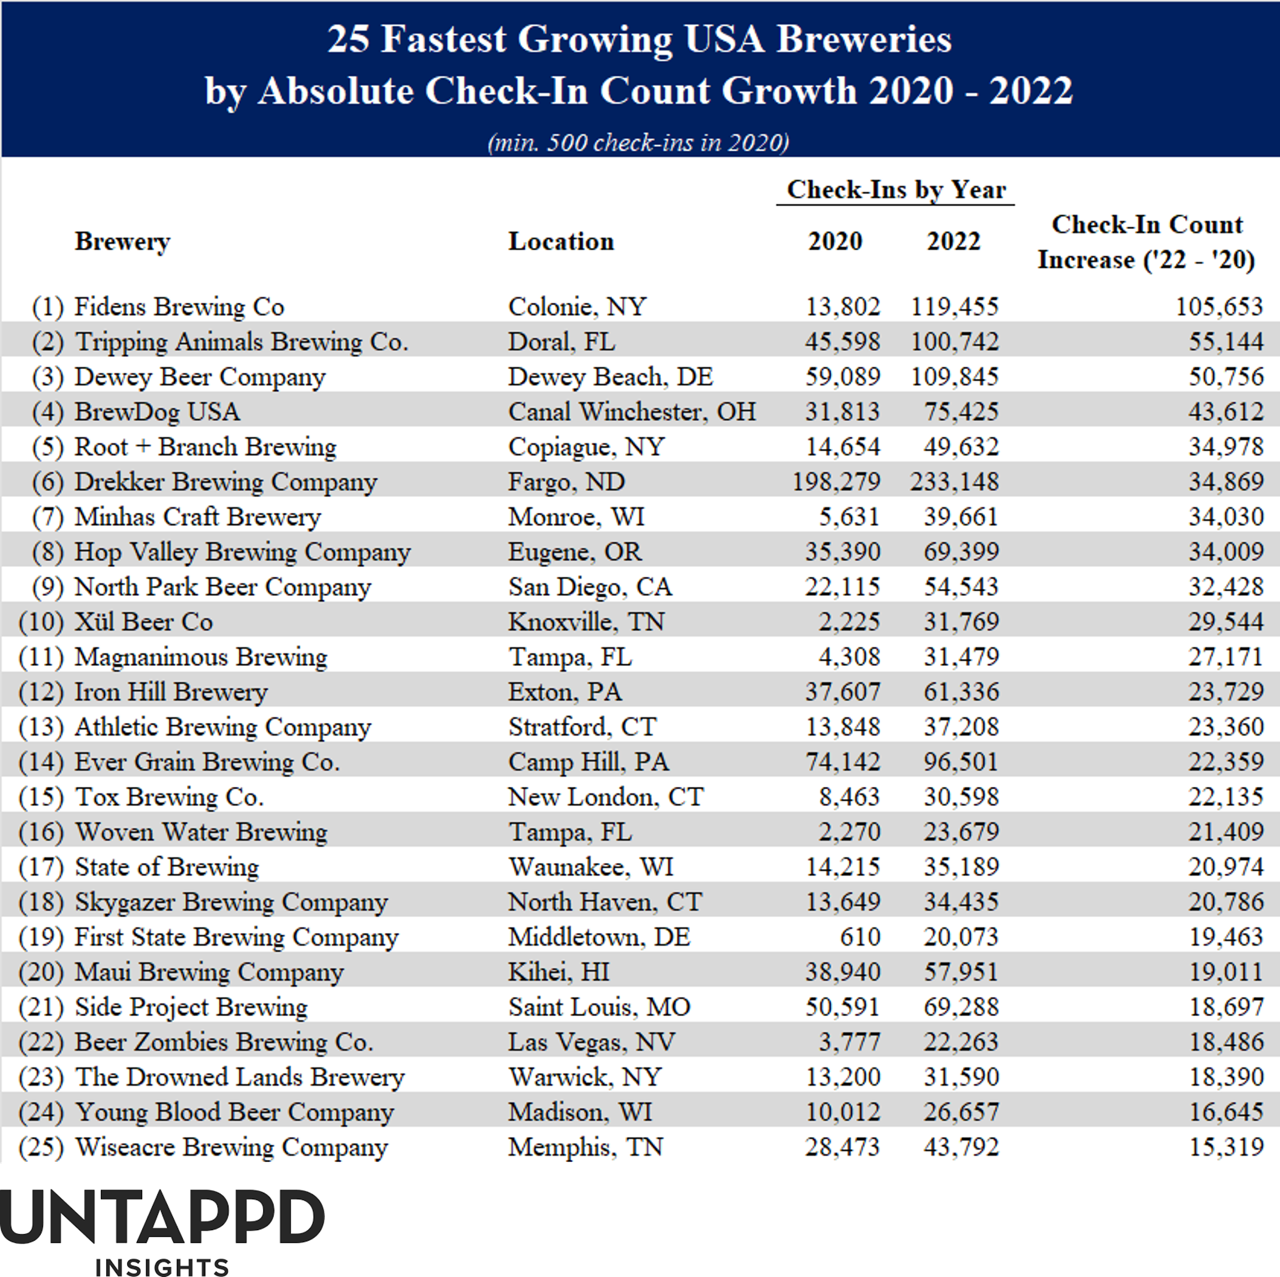 The 25 fastest growing U.S. breweries on Untappd between 2020 and 2022.